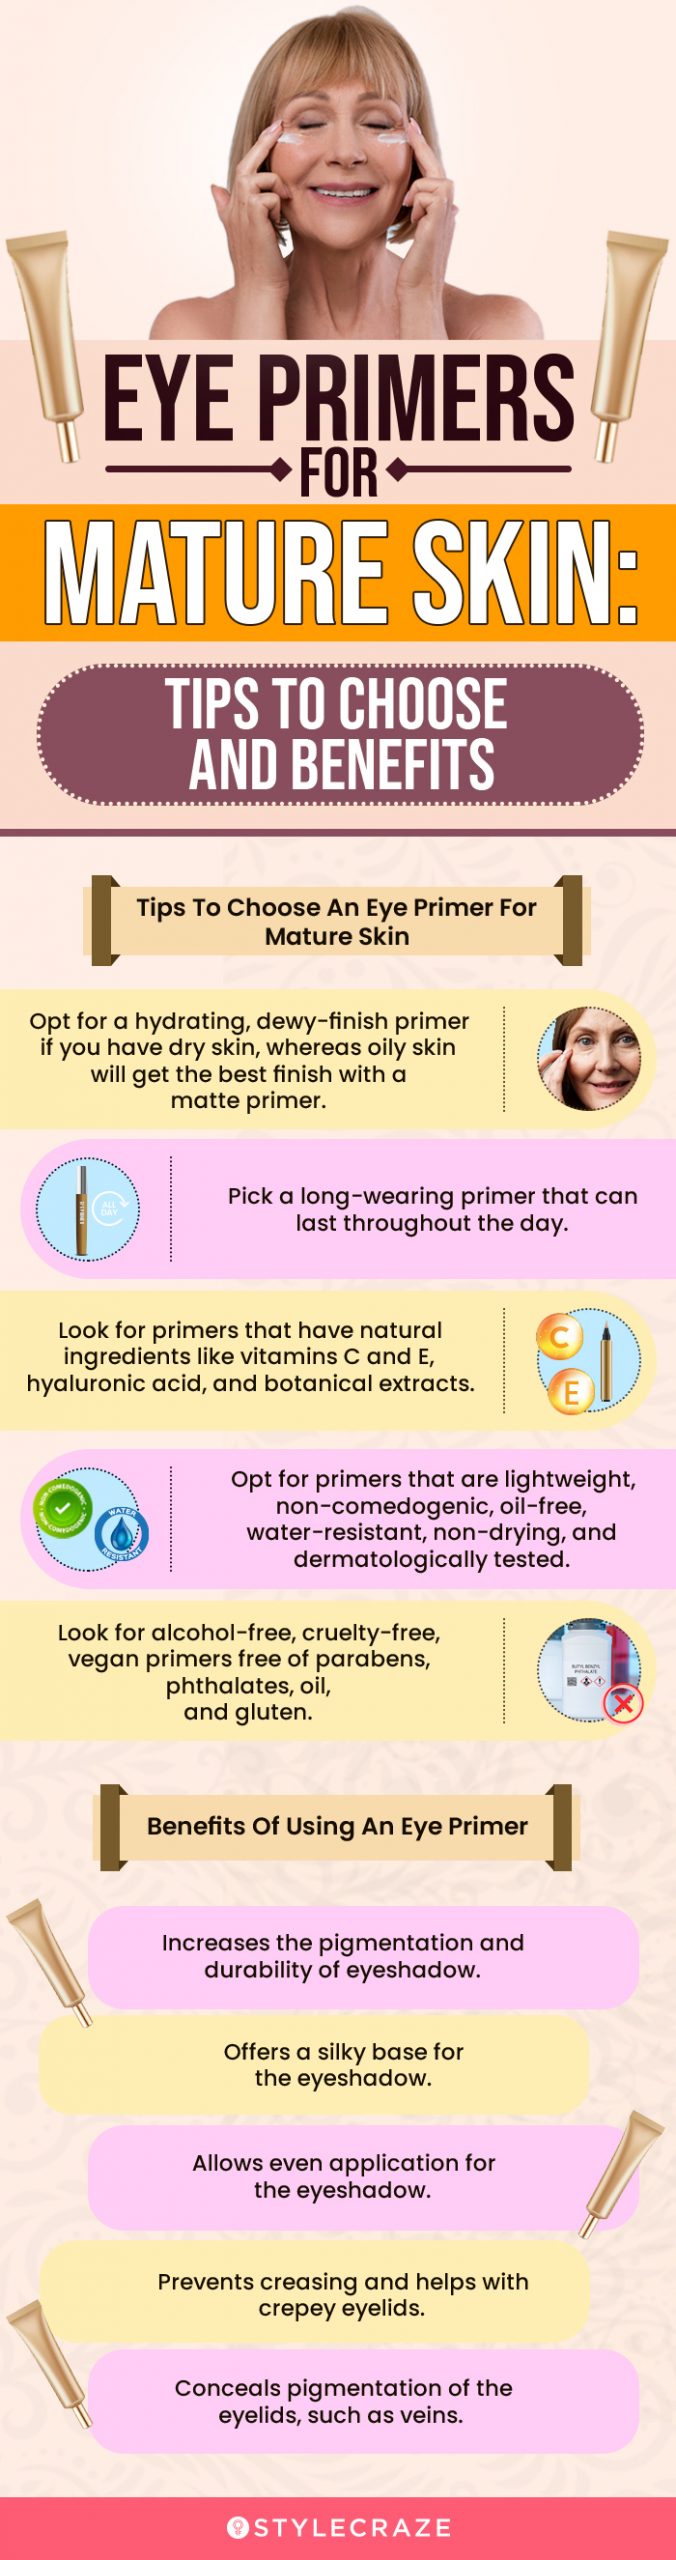 Eye Primers For Mature Skin: Tips To Follow And Benefits